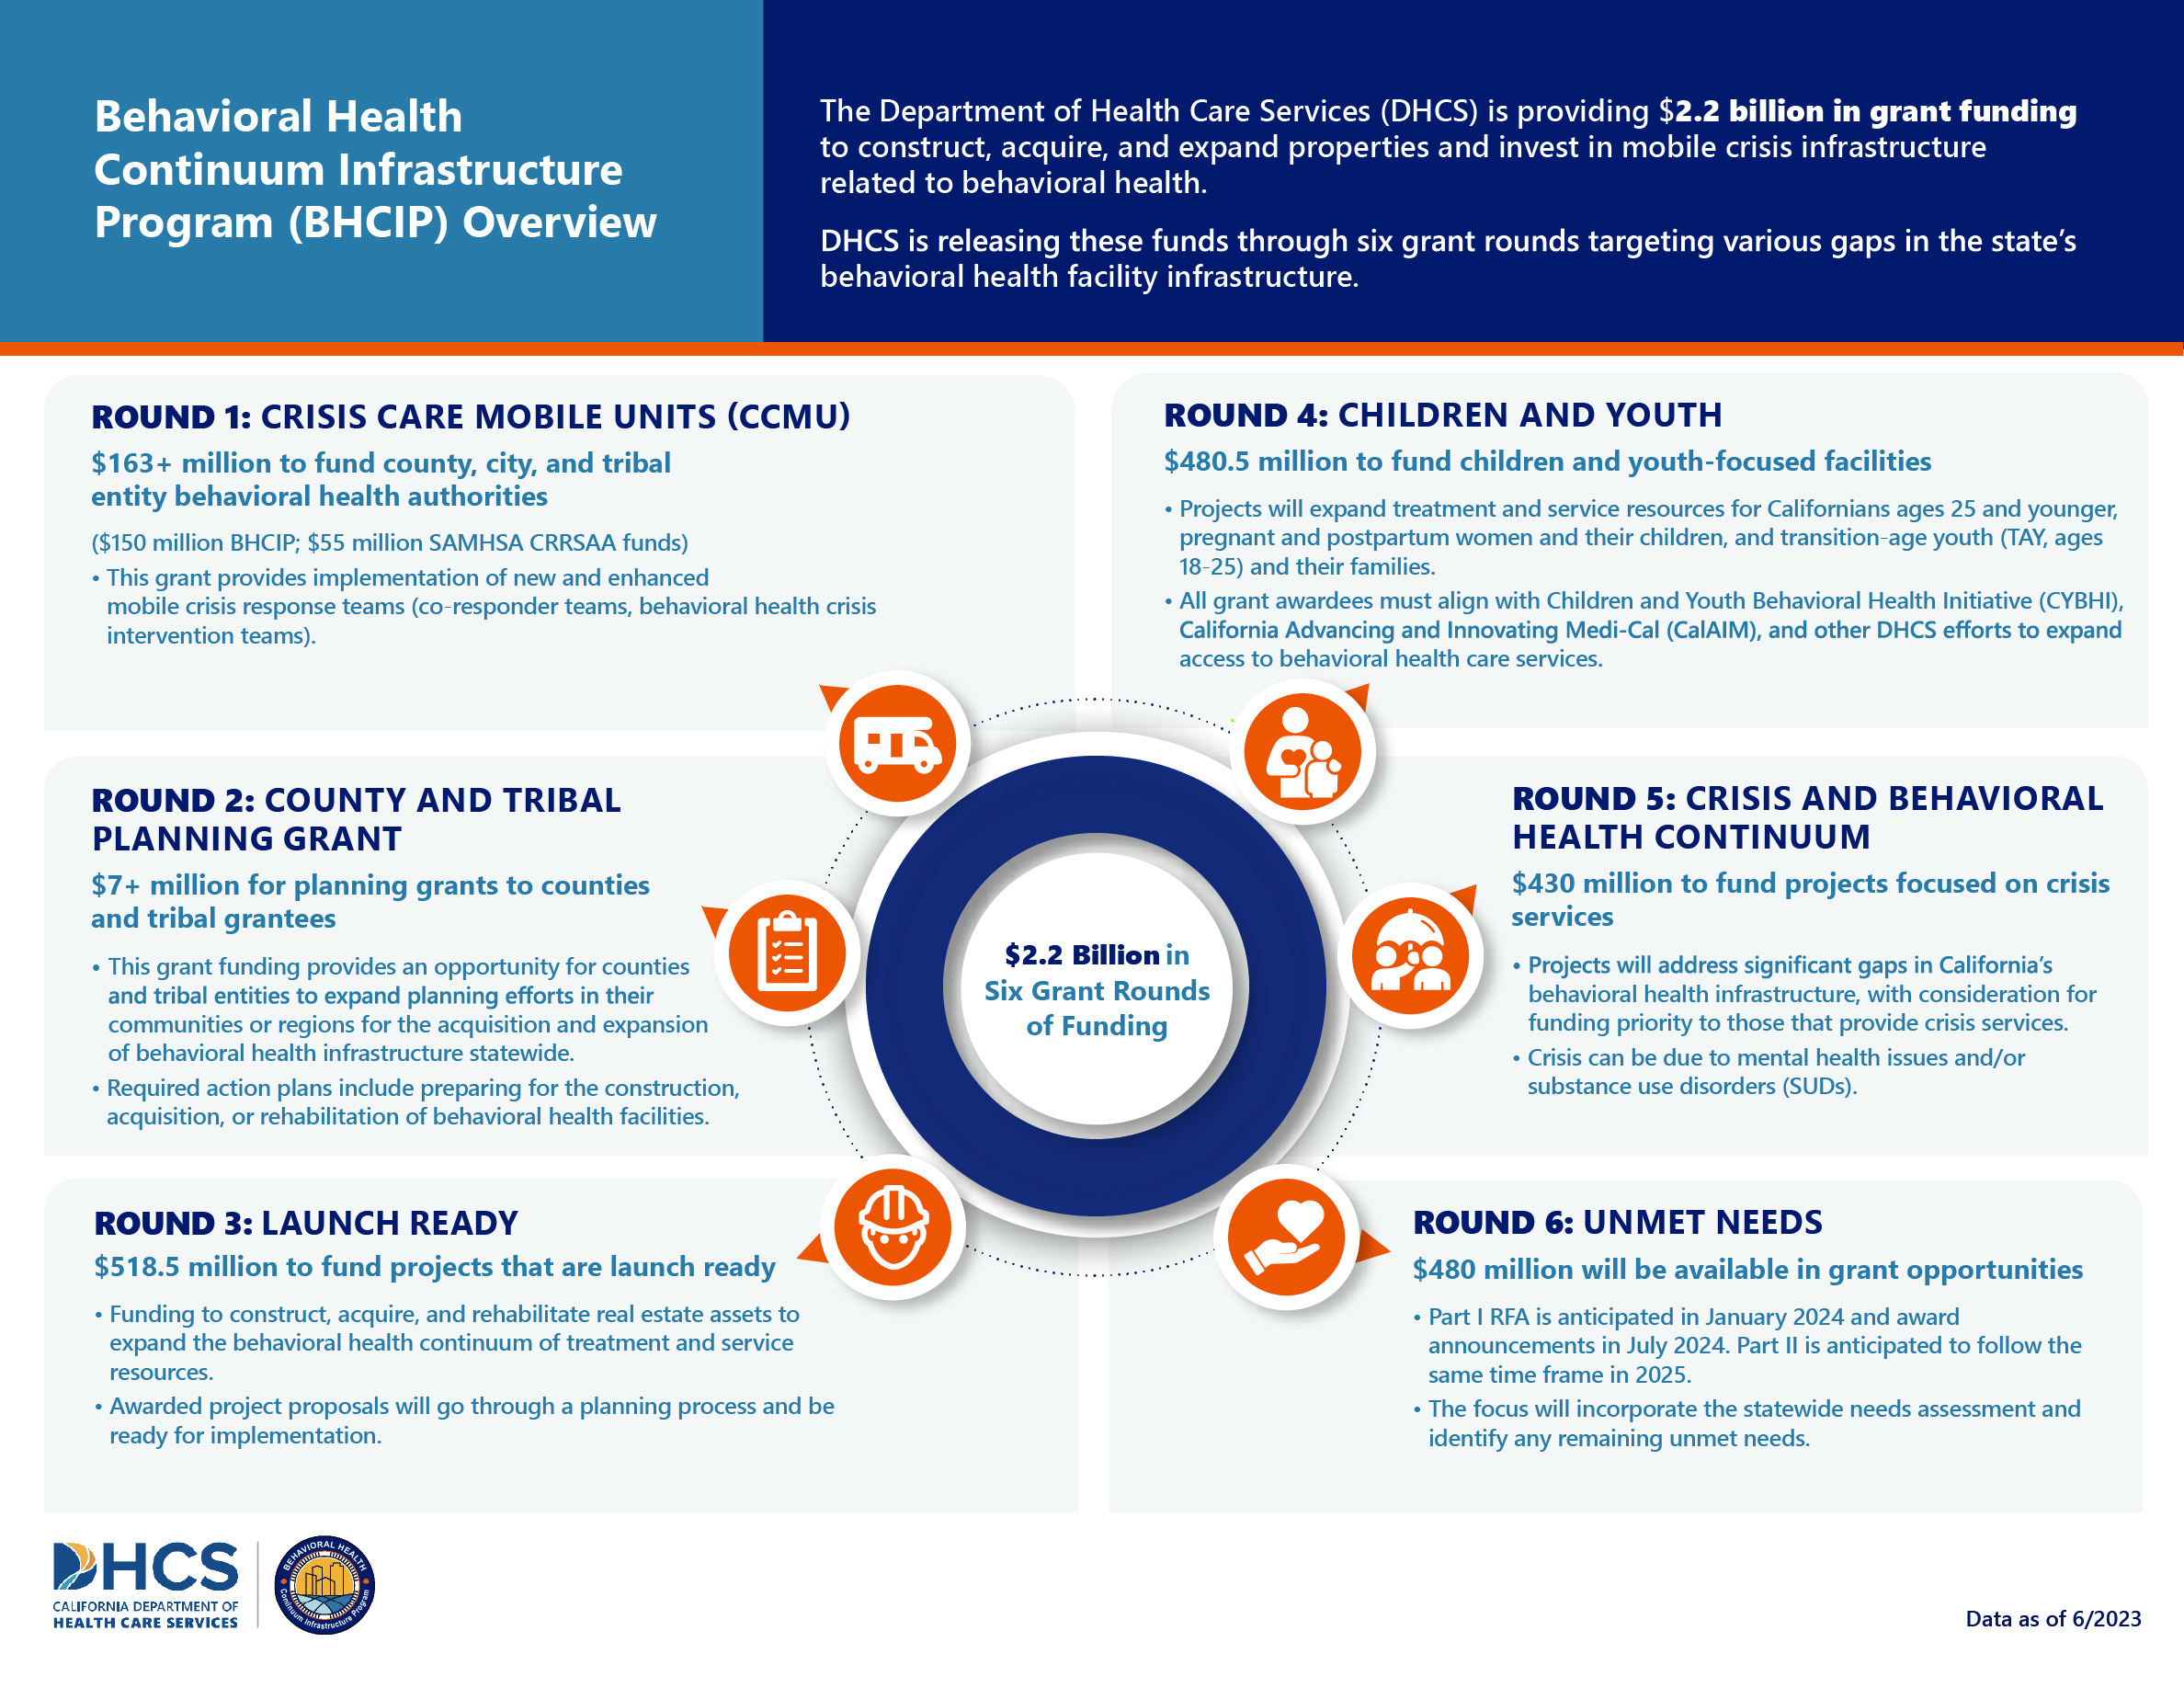 The Department of Health Care Services (DHCS) Infographic Overview